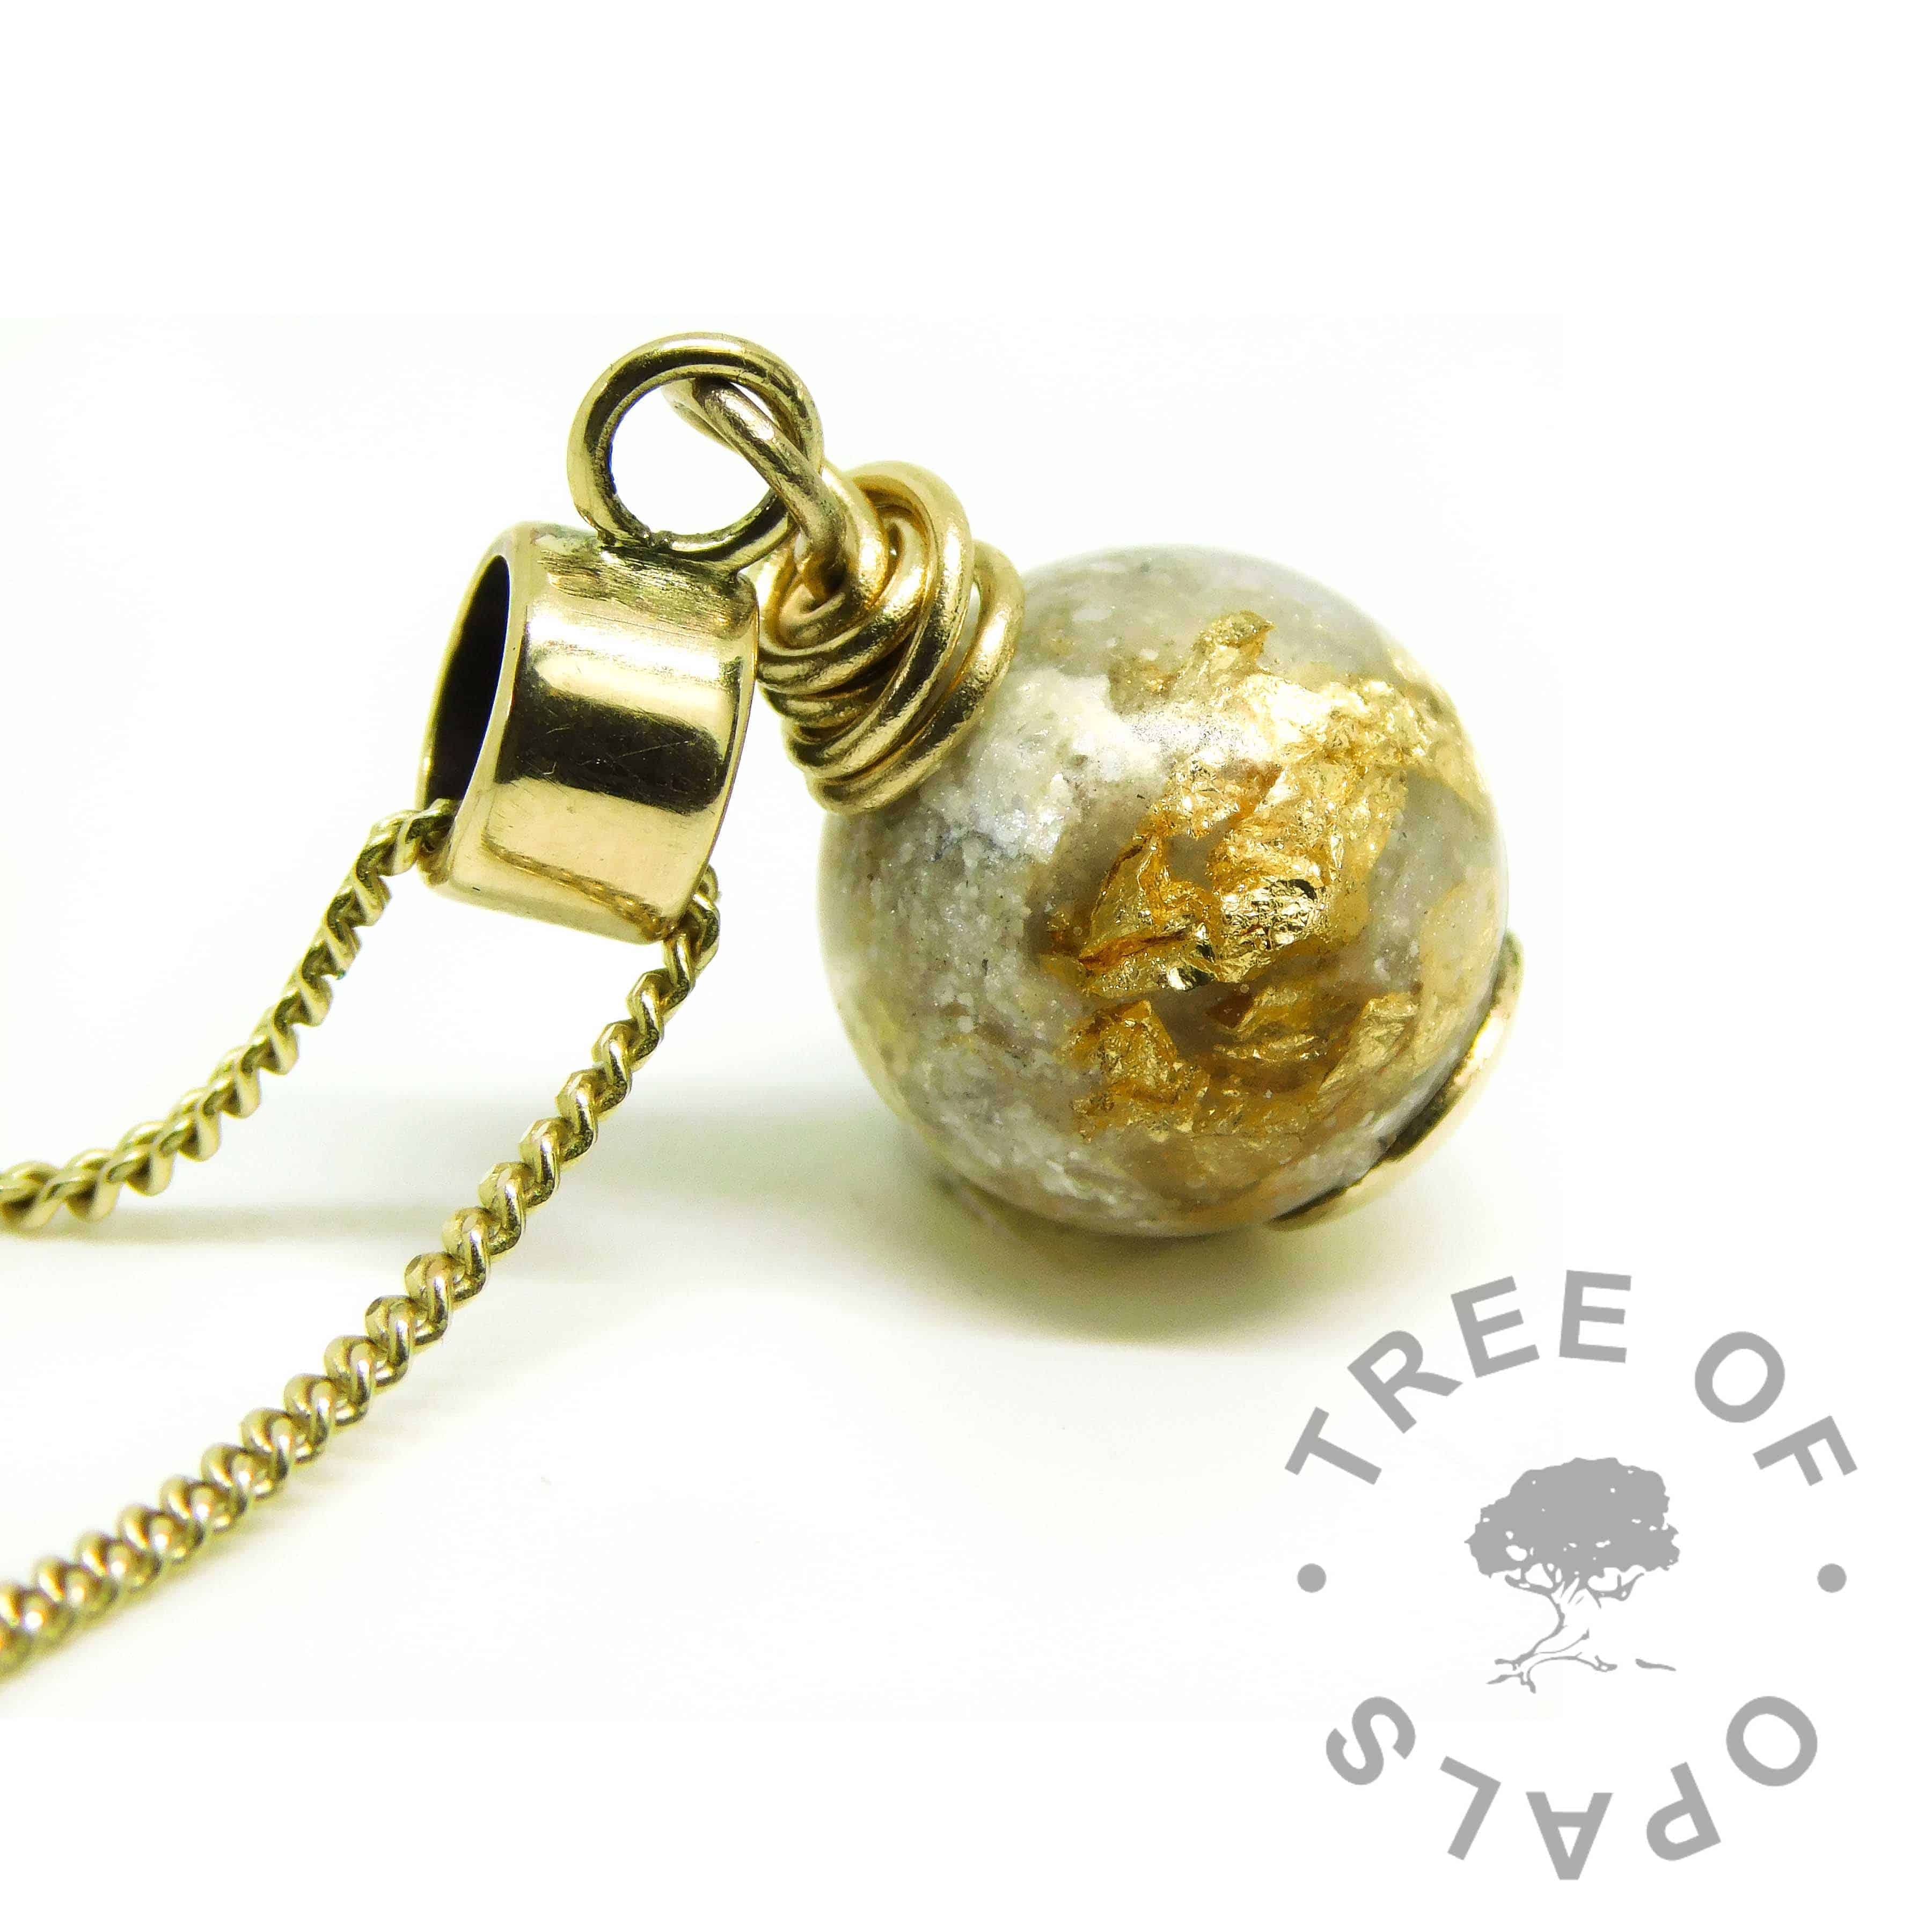 solid gold ashes pearl with 9ct gold European setting, shown on a medium-heavy 9ct yellow gold chain upgrade. Unicorn white resin sparkle mix and lots of gold leaf with cremation ashes in resin. Compatible with Chamilia and Pandora bracelets